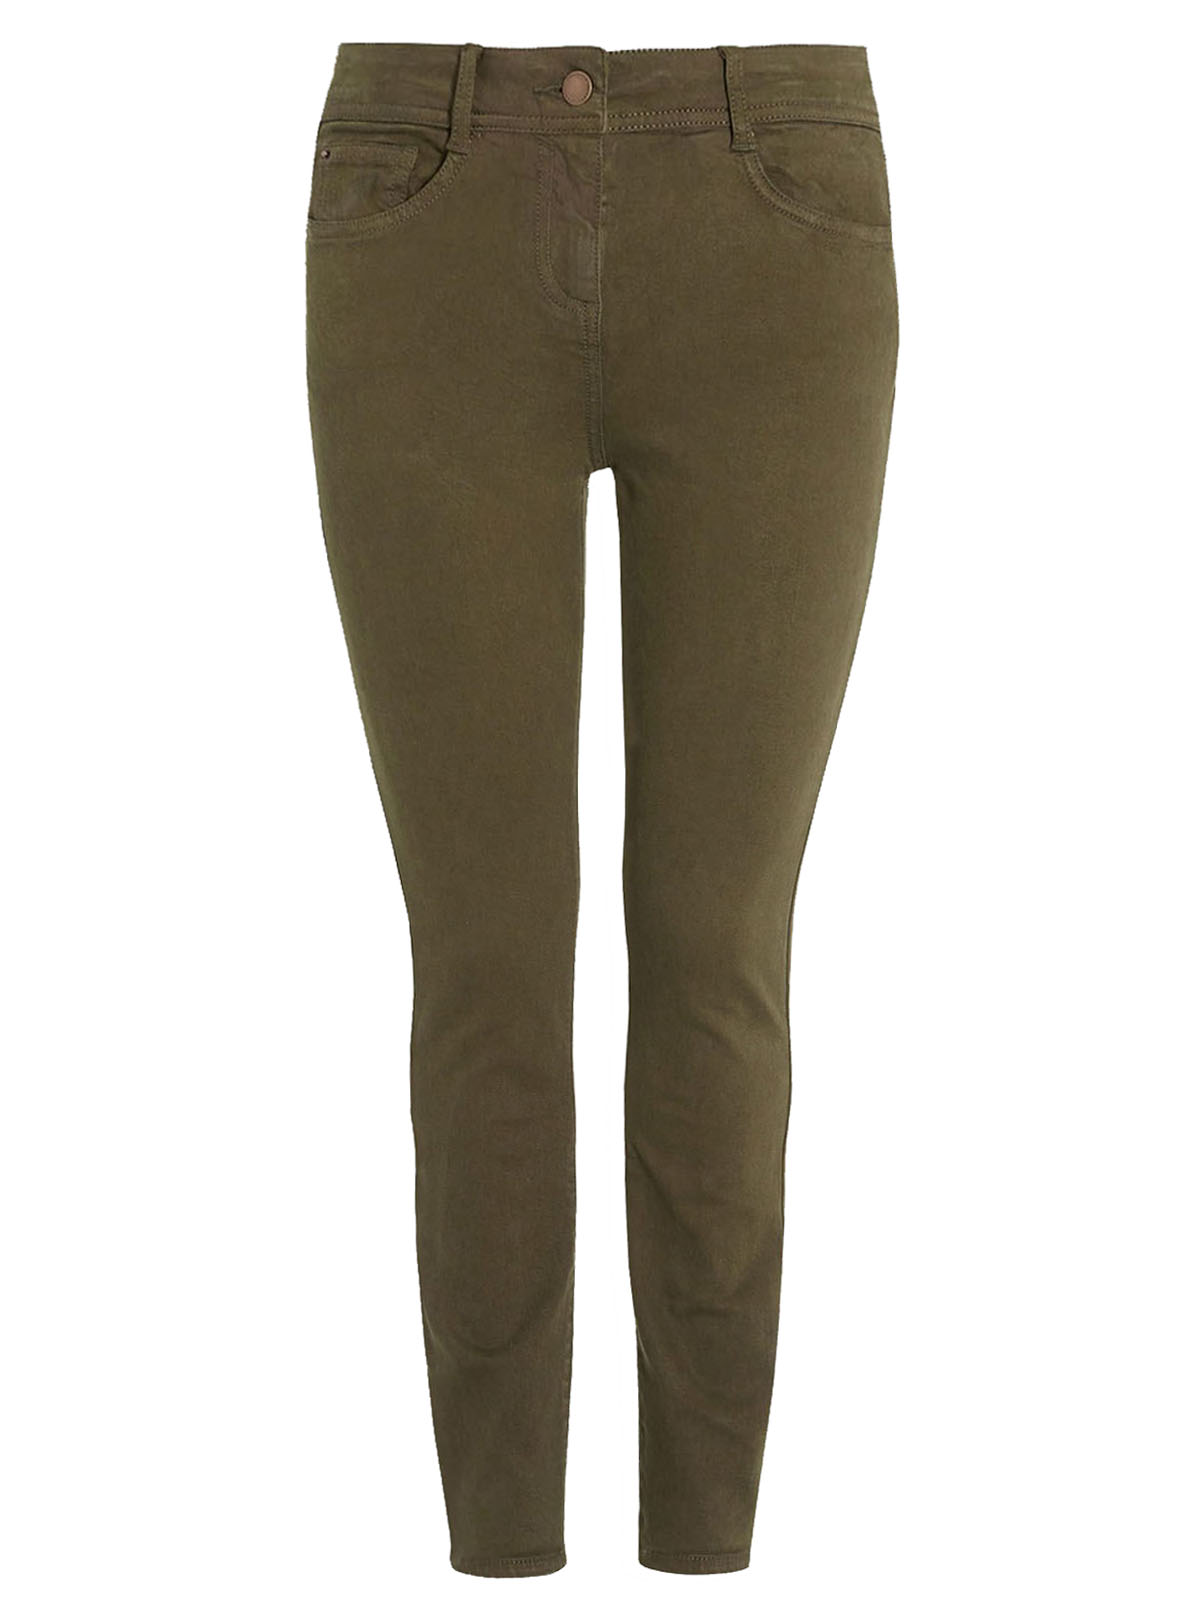 N3XT OLIVE Skinny Fit Jeans - Size 6 to 24